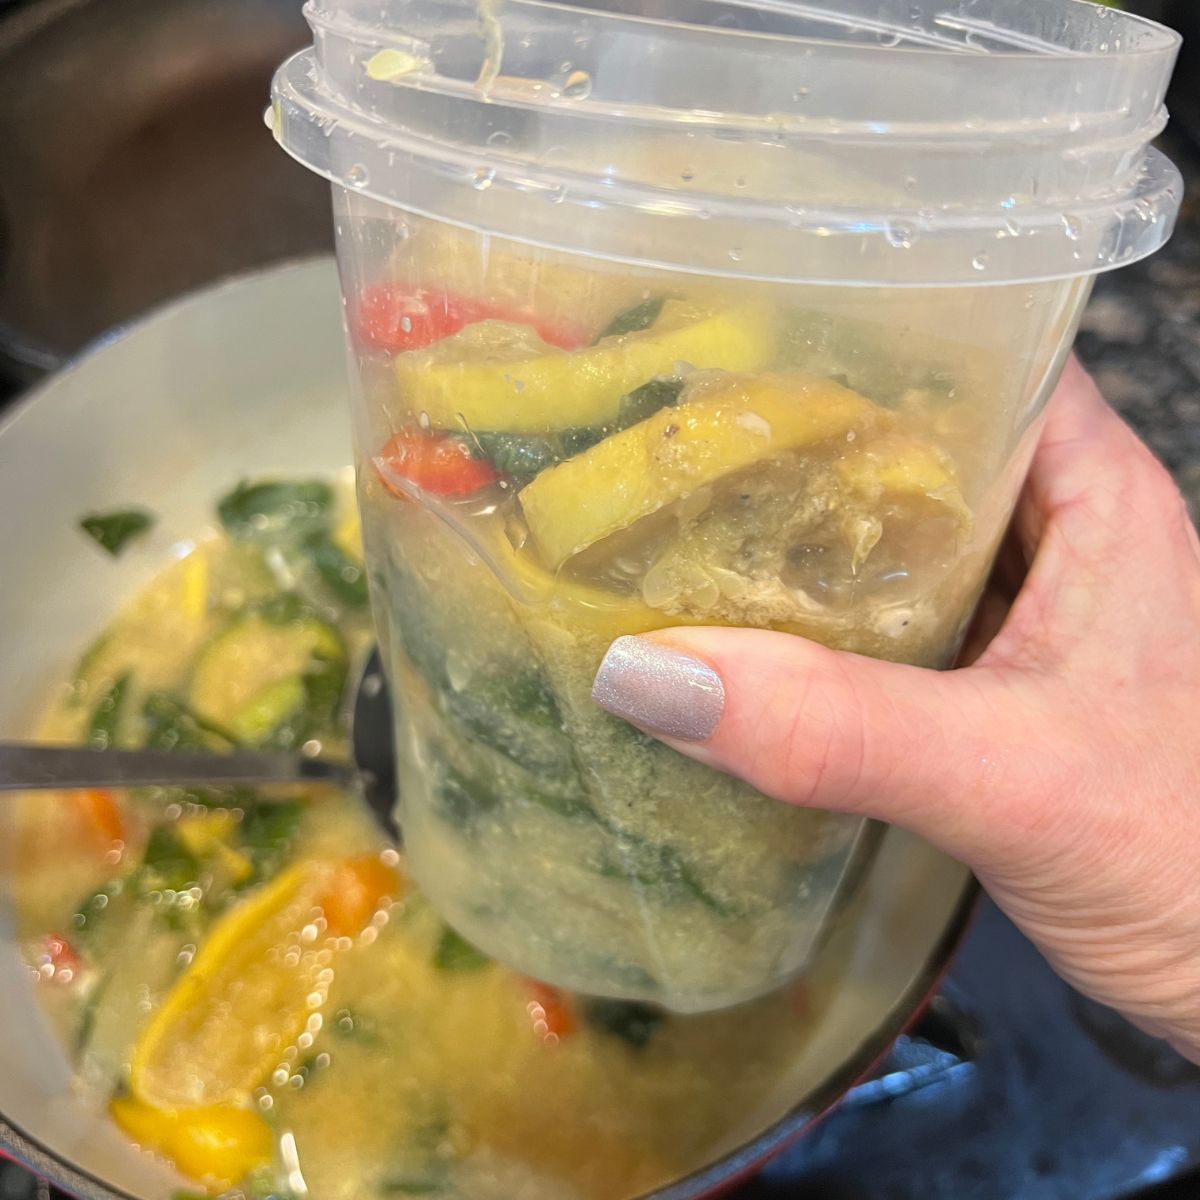 A hand holding a container of yellow squash soup